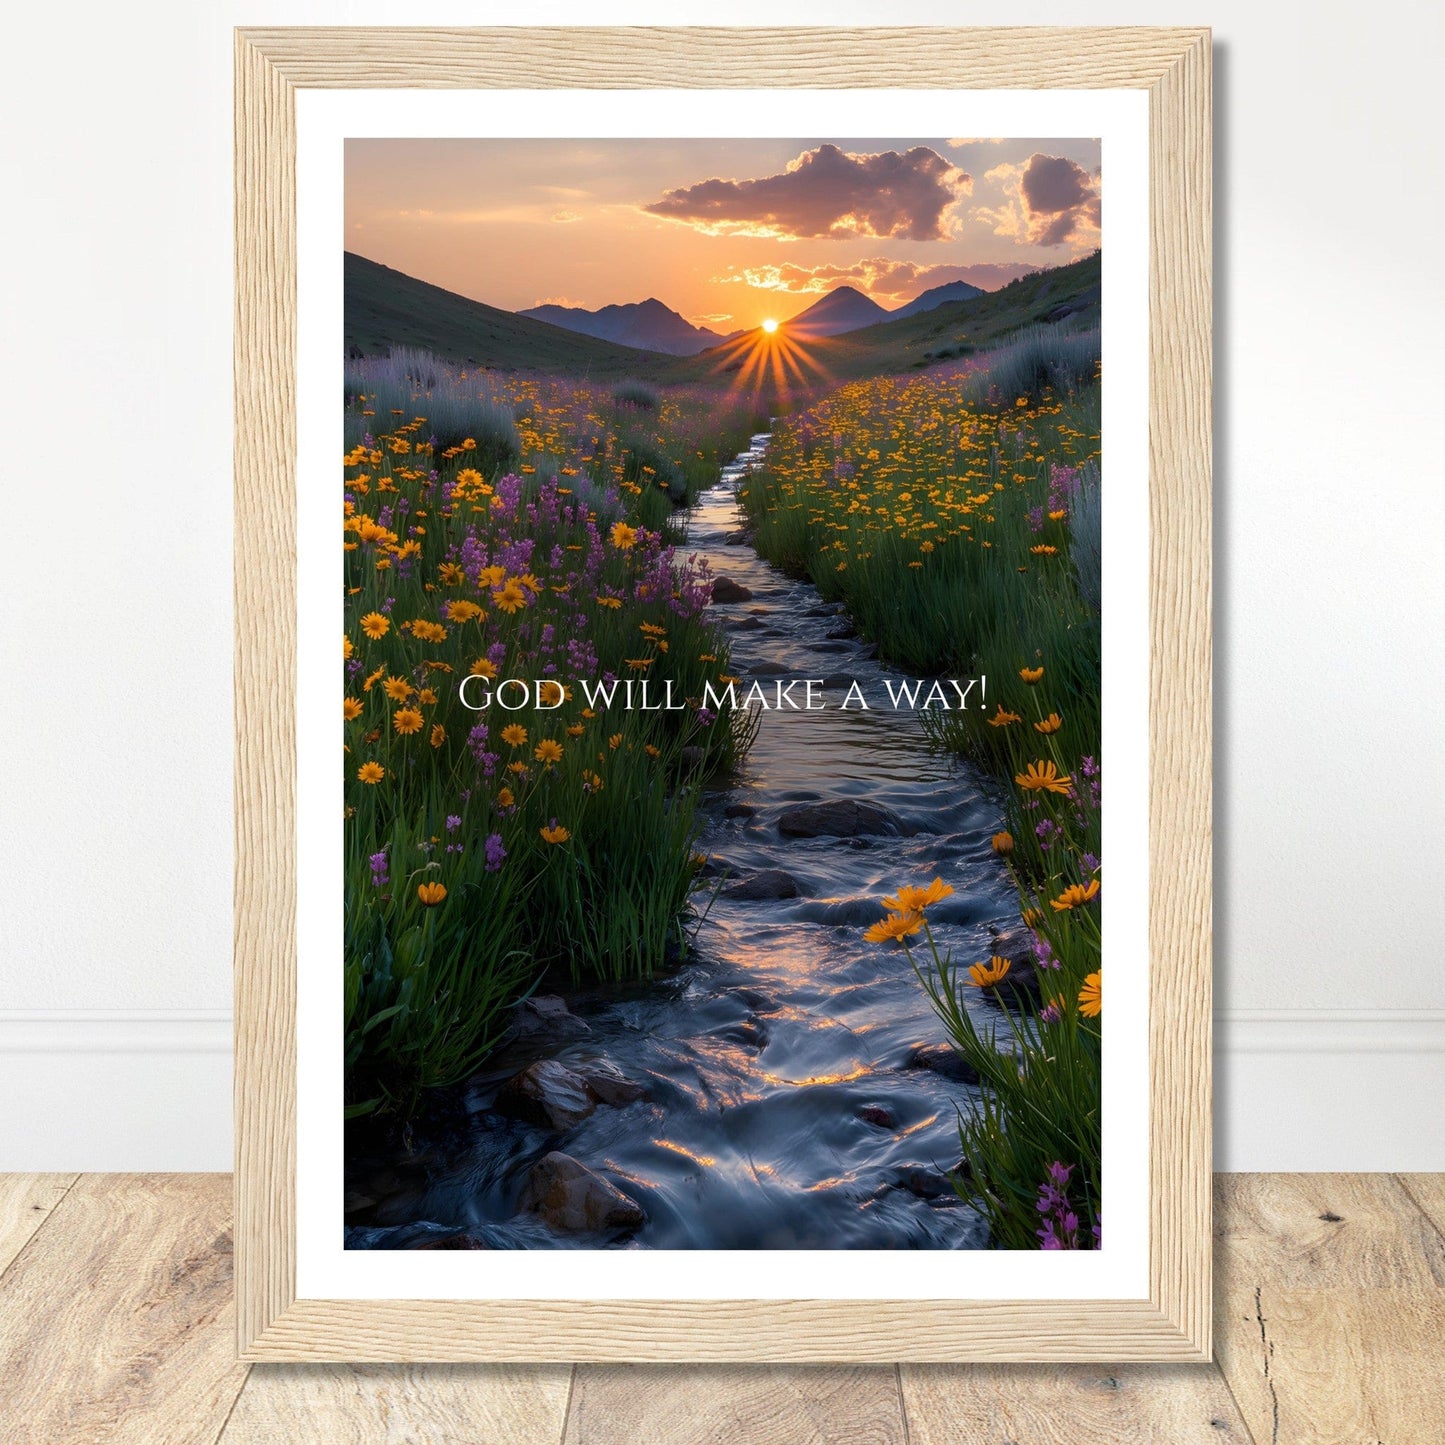 Coffee With My Father Print Material 21x29.7 cm / 8x12″ / Framed / Wood frame God Will Make A Way - Custom Art